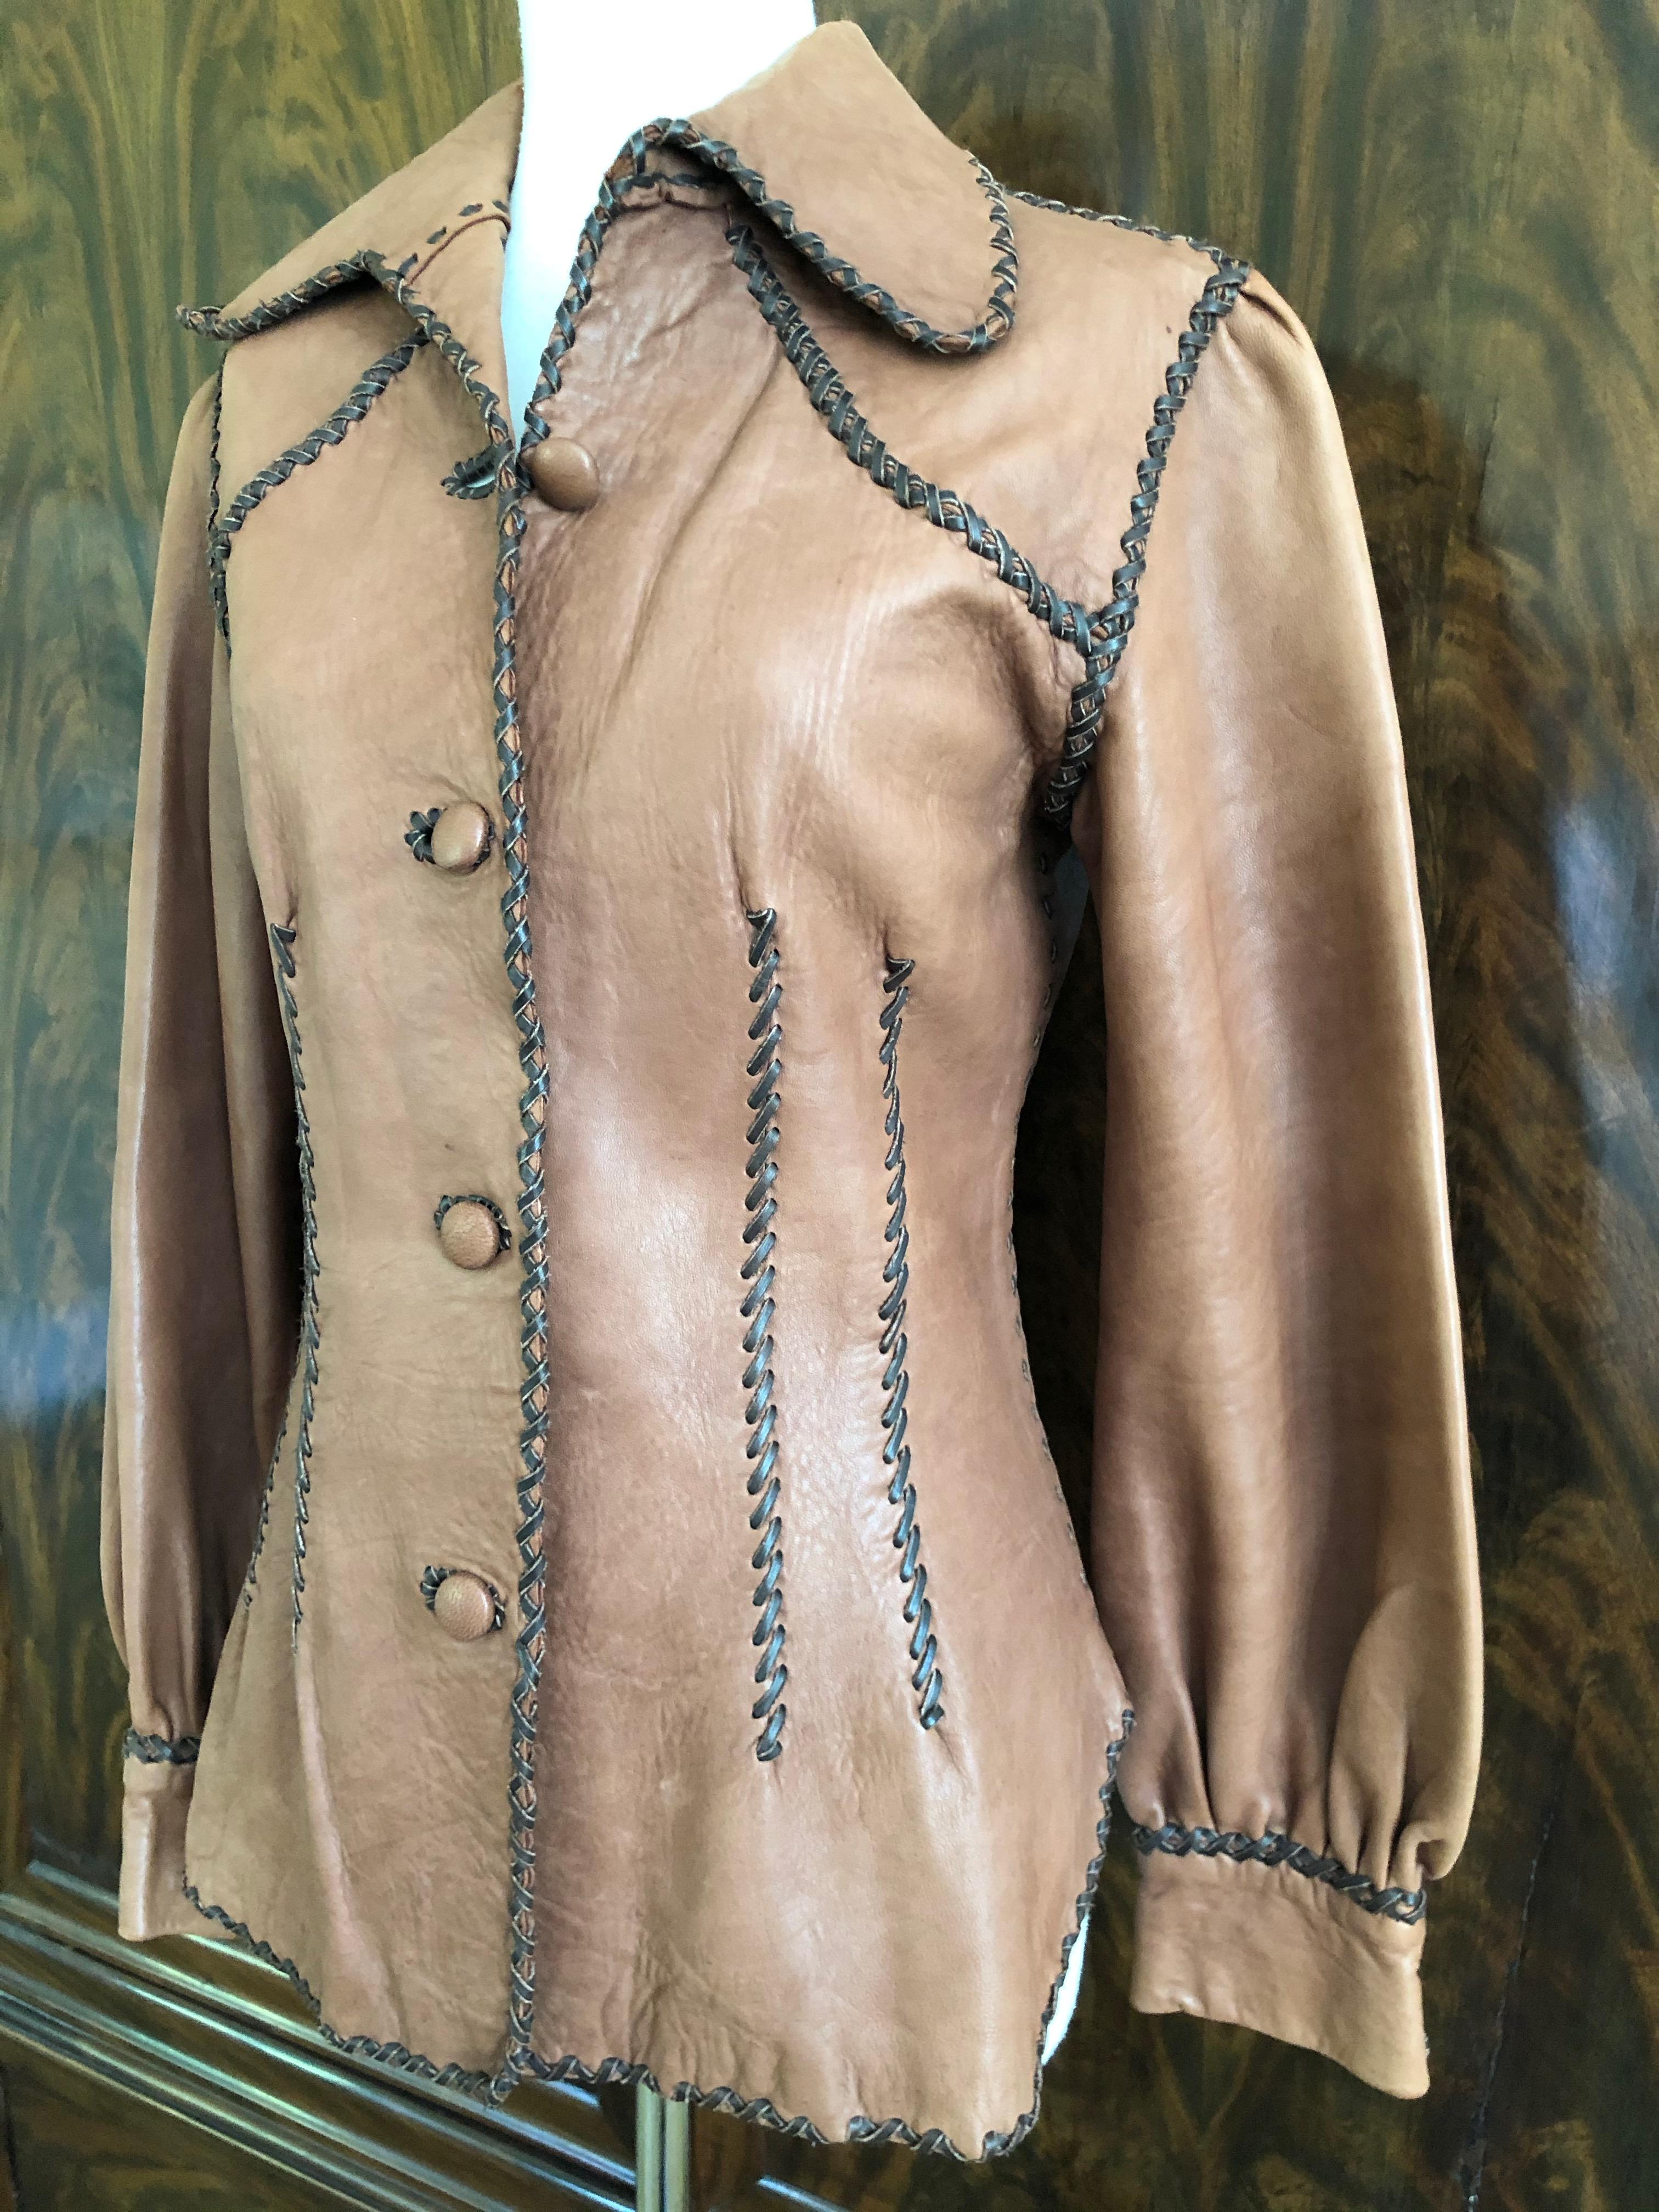 North Beach Leather Early 1970's Whipstitched Leather Rich Hippie Jacket
Classic vintage North Beach Leather whip stitched jackt.
Crafted in Mexico, this is a rare treasure. In great pre owned condition, there are some spots, but not too